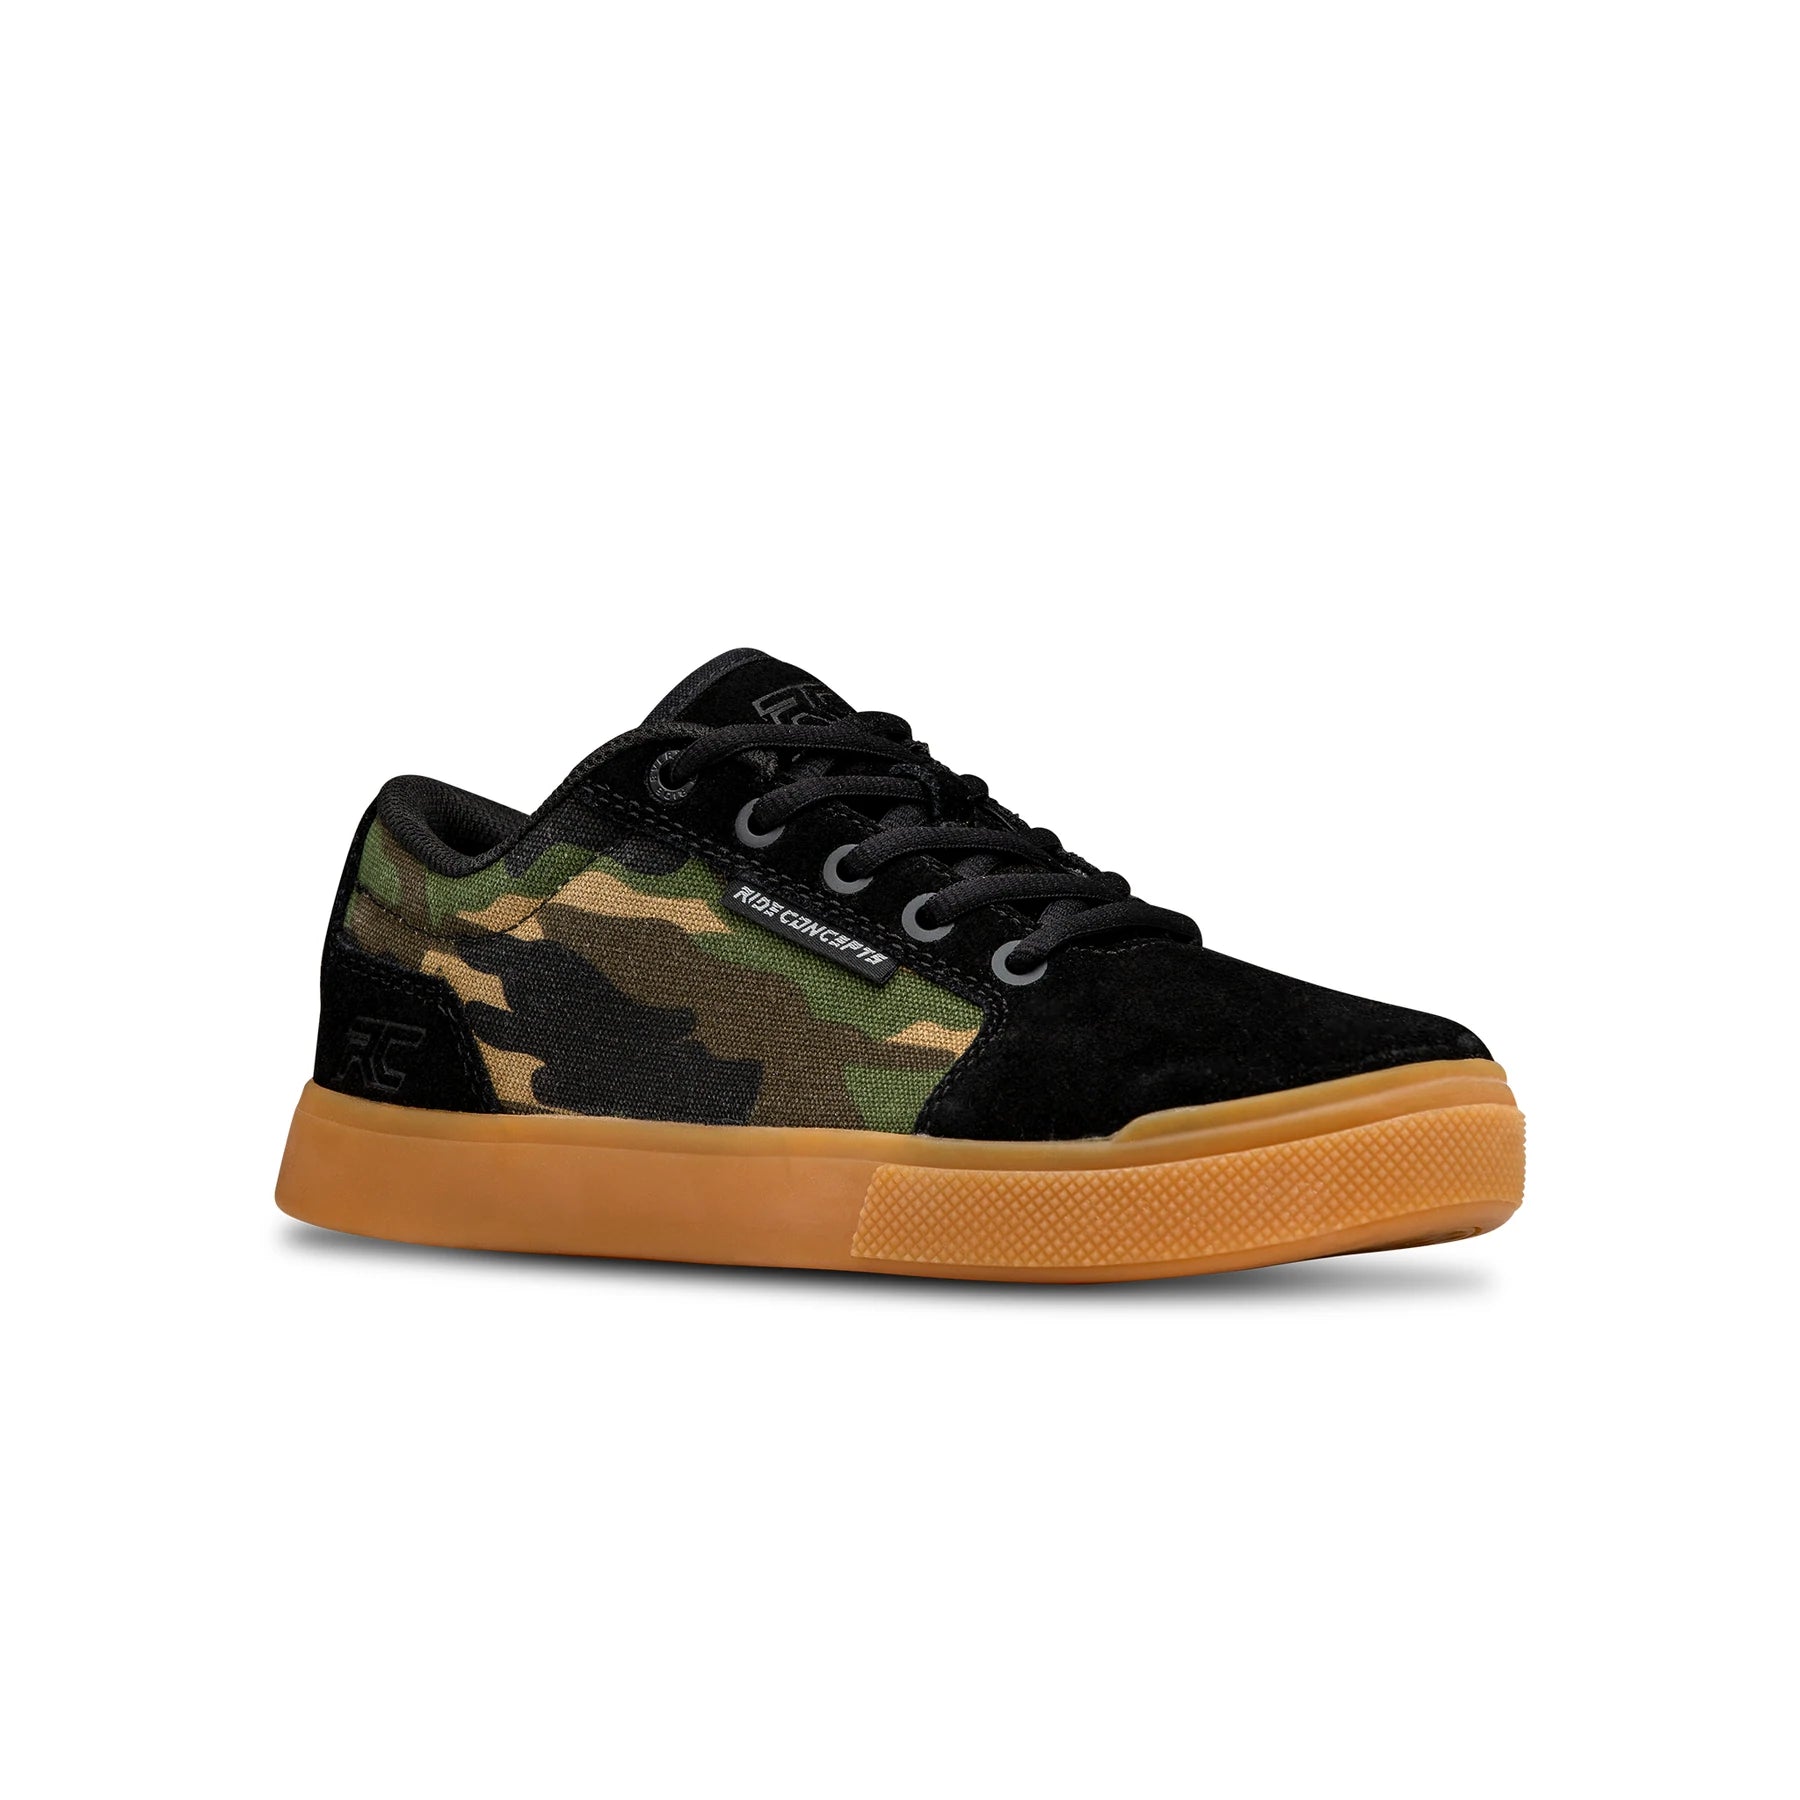 Ride Concepts Vice Youth Bike Shoes - Mountain Kids Outfitters: Camo Black, Front View